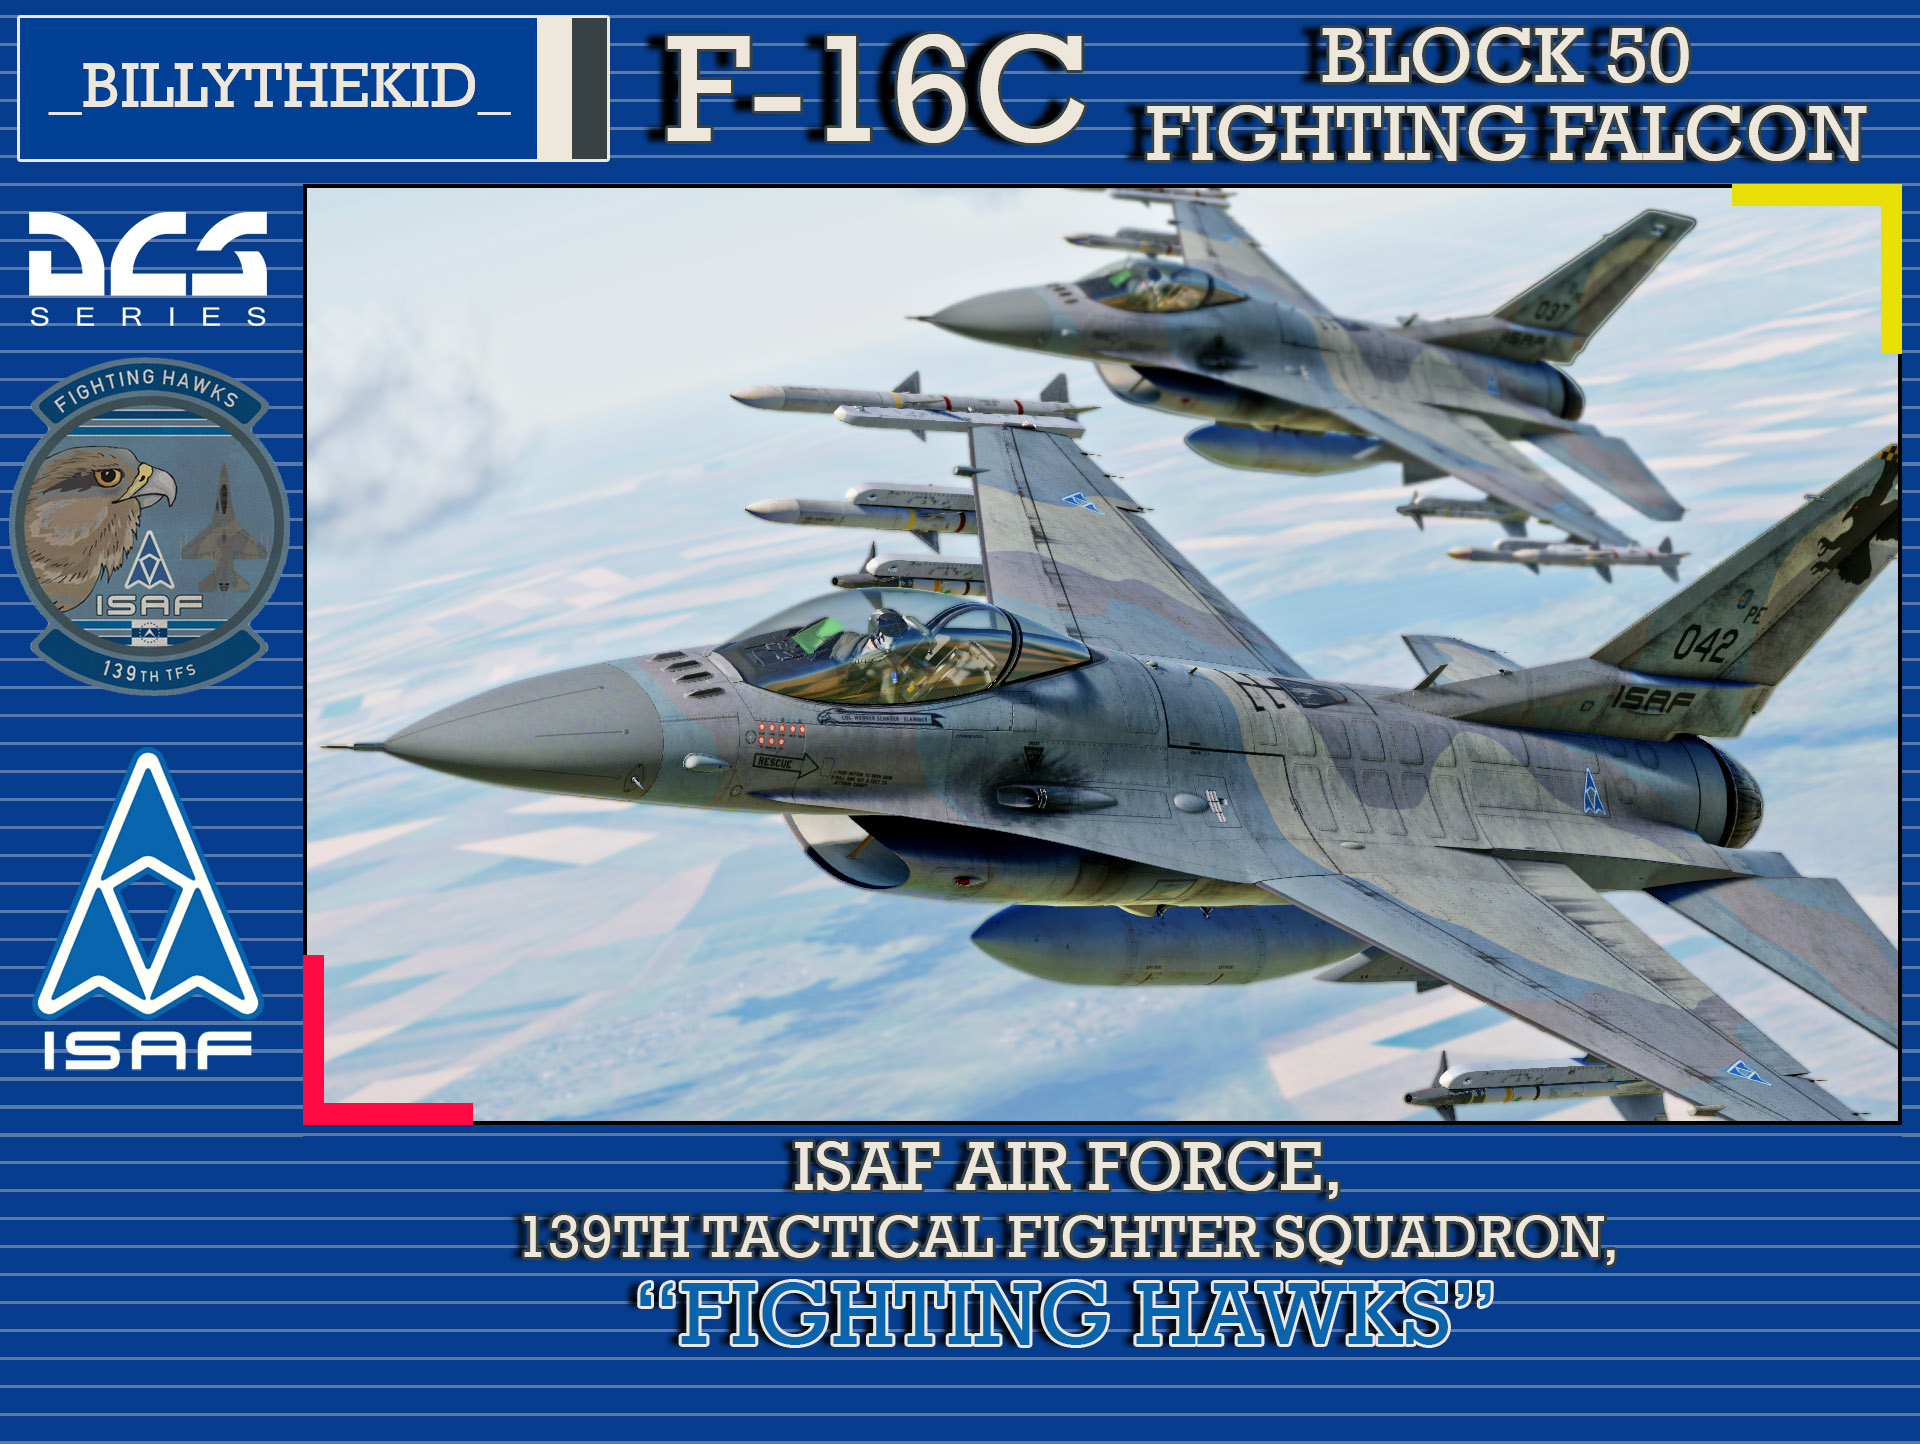 Ace Combat - ISAF Air Force - 139th Tactical Fighter Squadron "Fighting Hawks" F-16C Block 50 Fighting Falcon